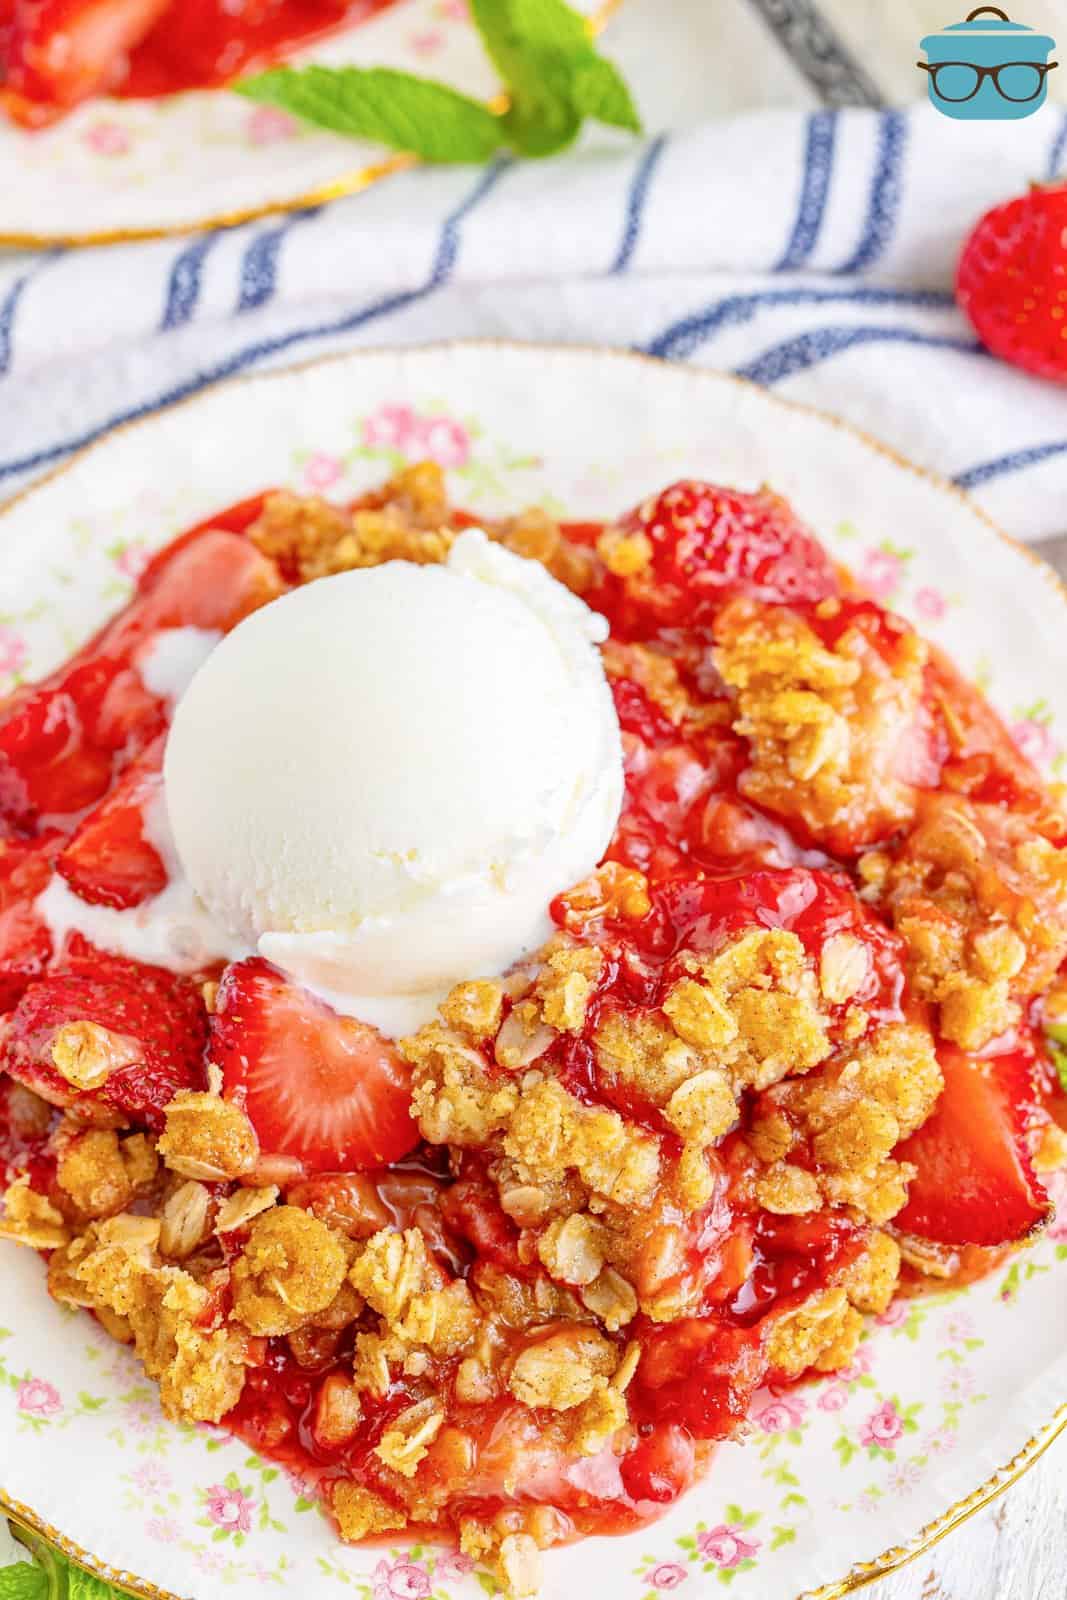 A dessert plate of strawberry crumble with a dollop of ice cream on top.